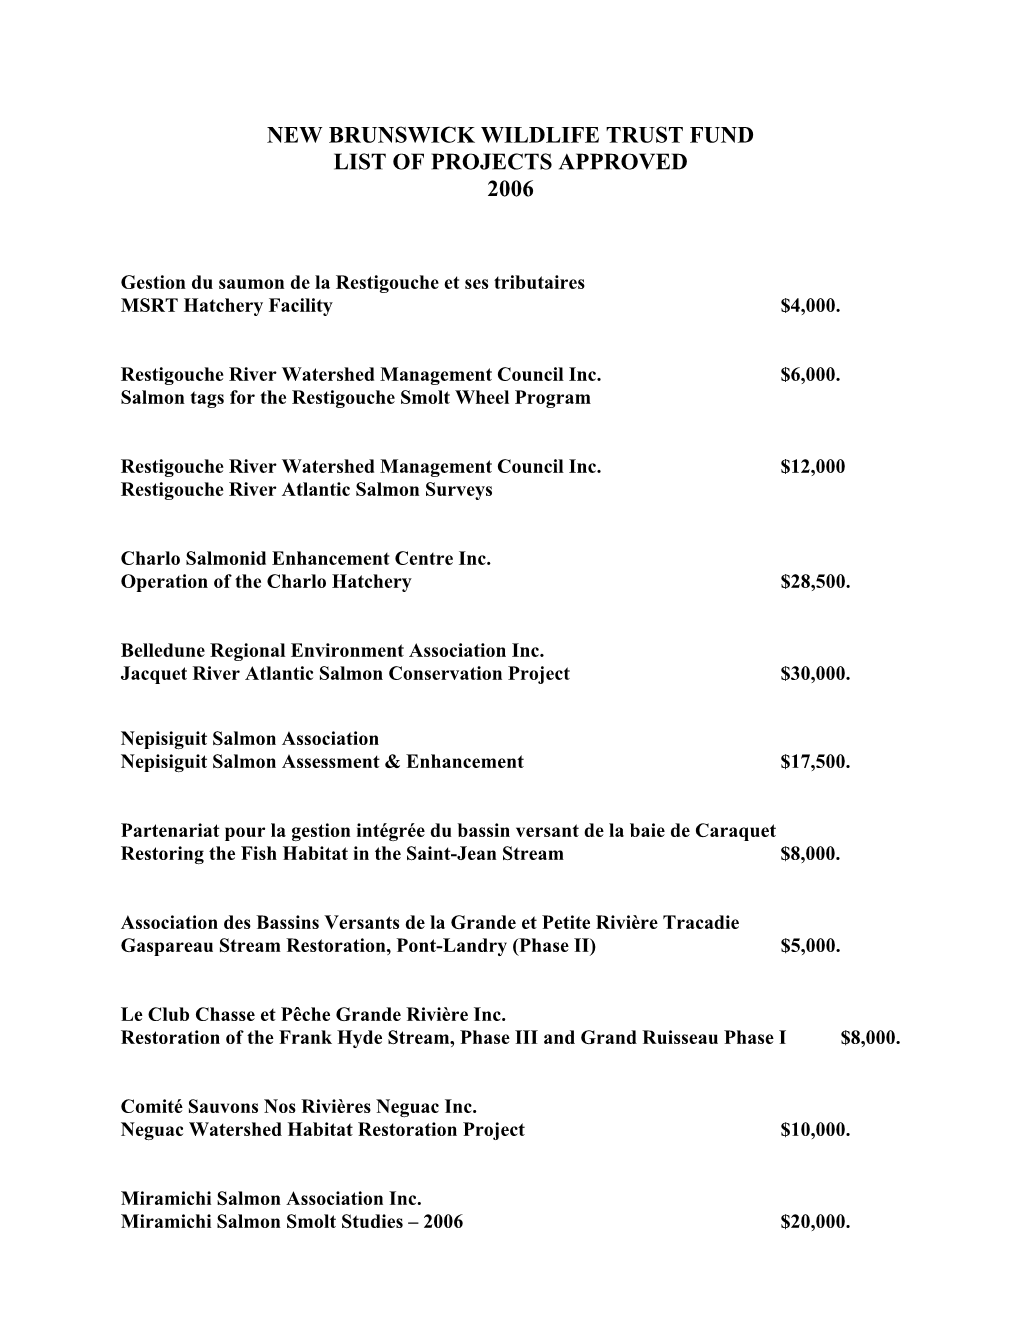 List of Projects Approved 2006